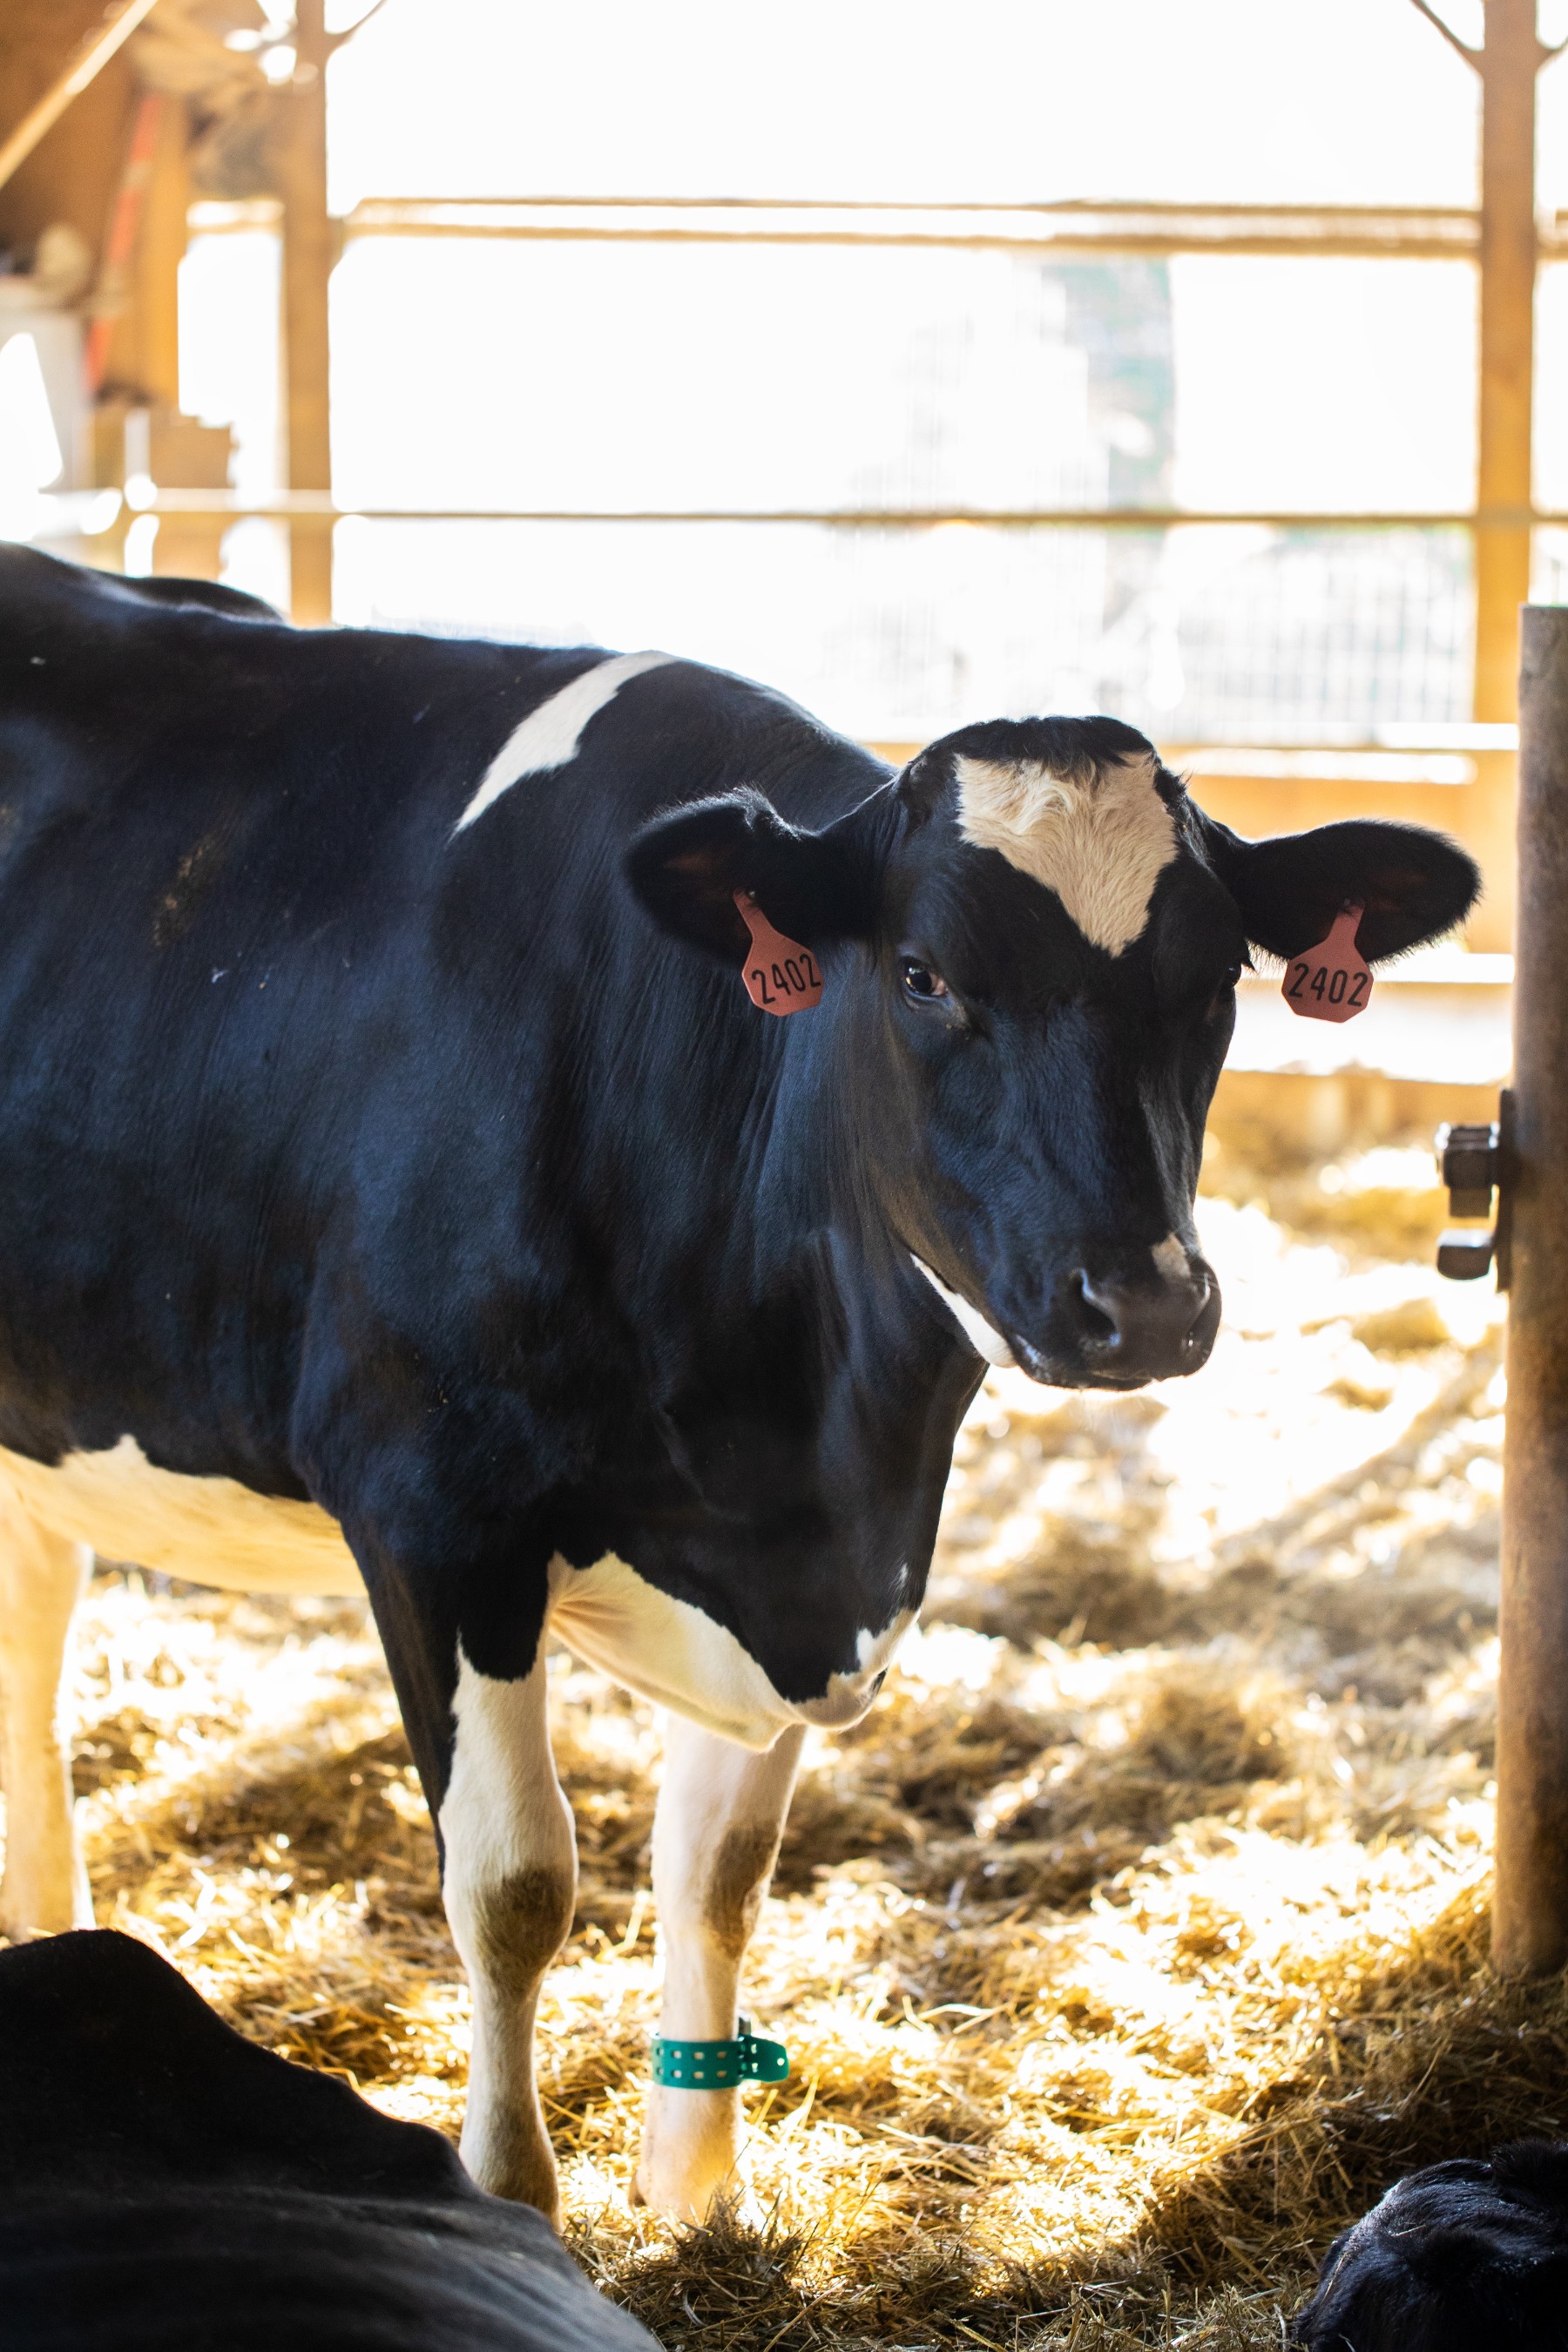 Cow burps are a major source of methane on dairy farms. Ben & Jerry's will test the effectiveness of feed additives and a high-forage diet on reducing enteric emissions. Photo: Ben & Jerry's